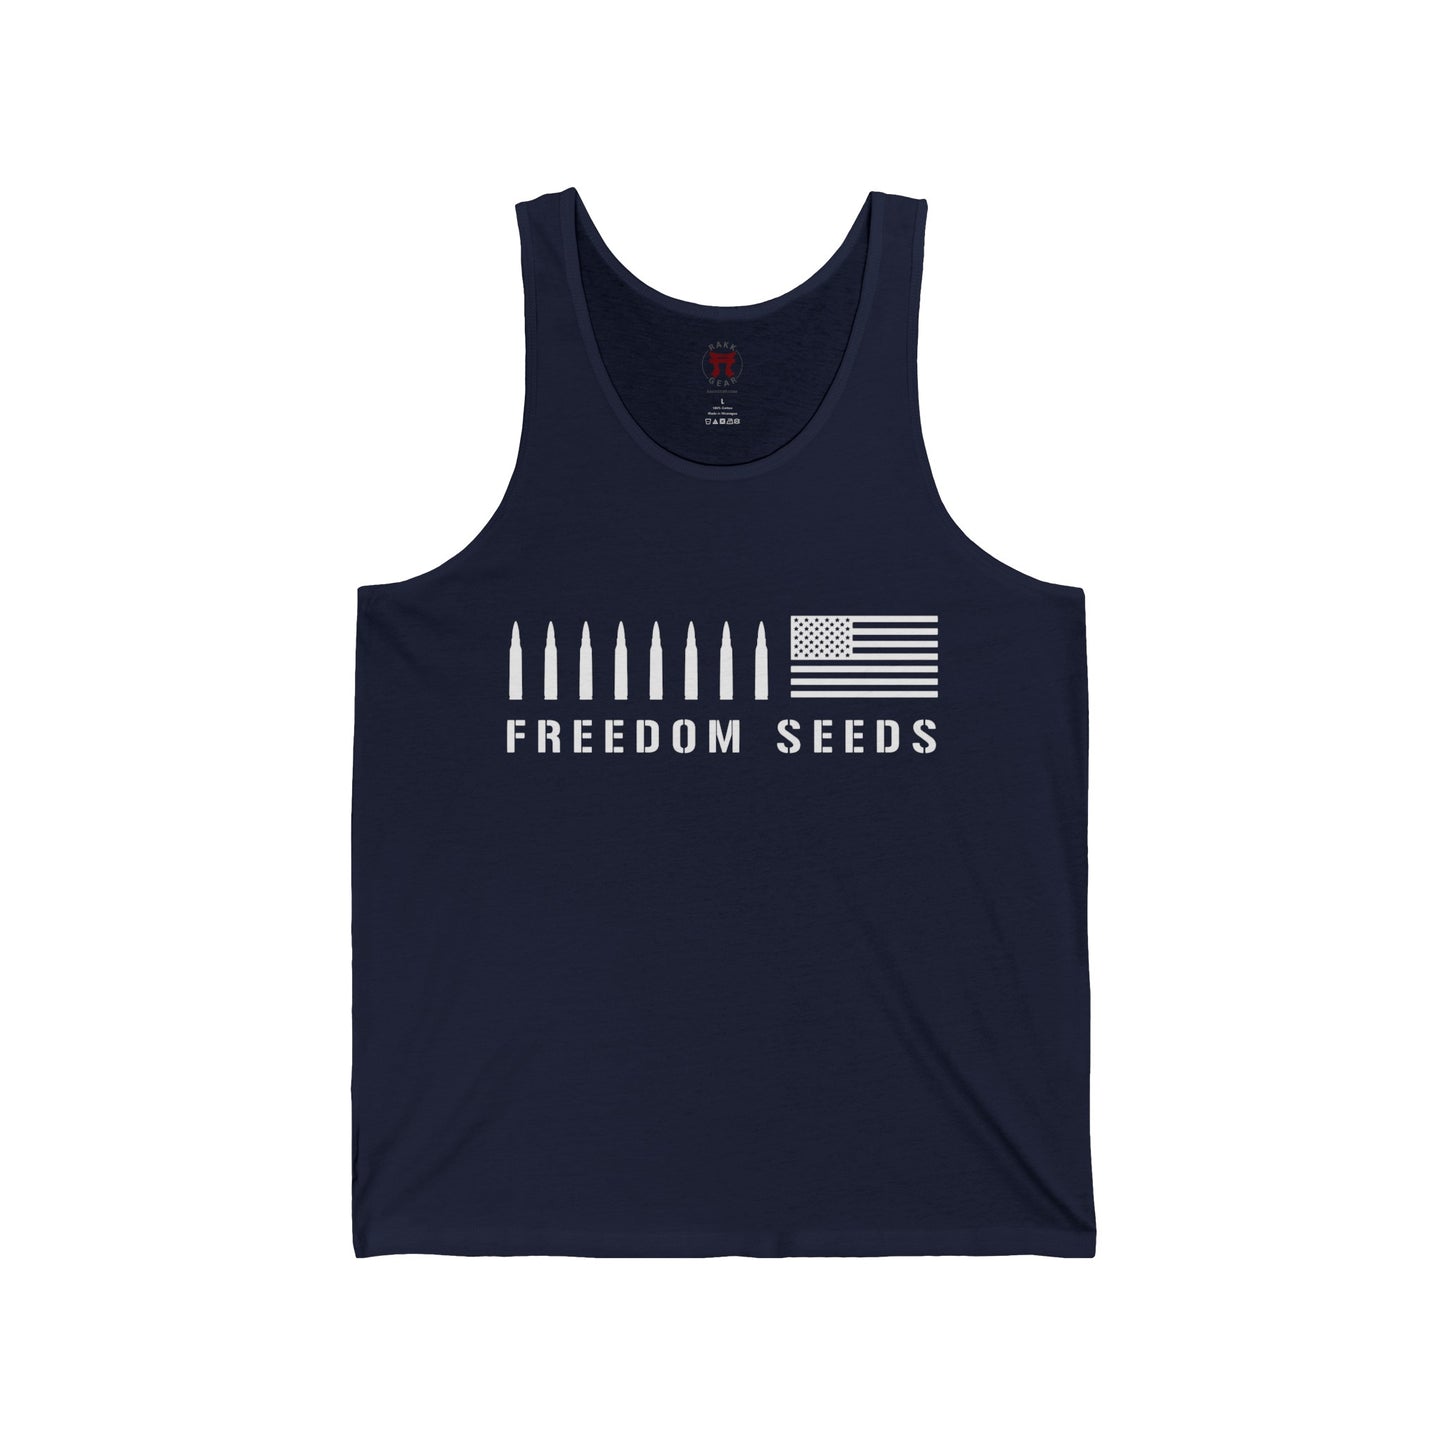 Rakkgear Freedom Seeds Tank Top in navy blue with white lettering